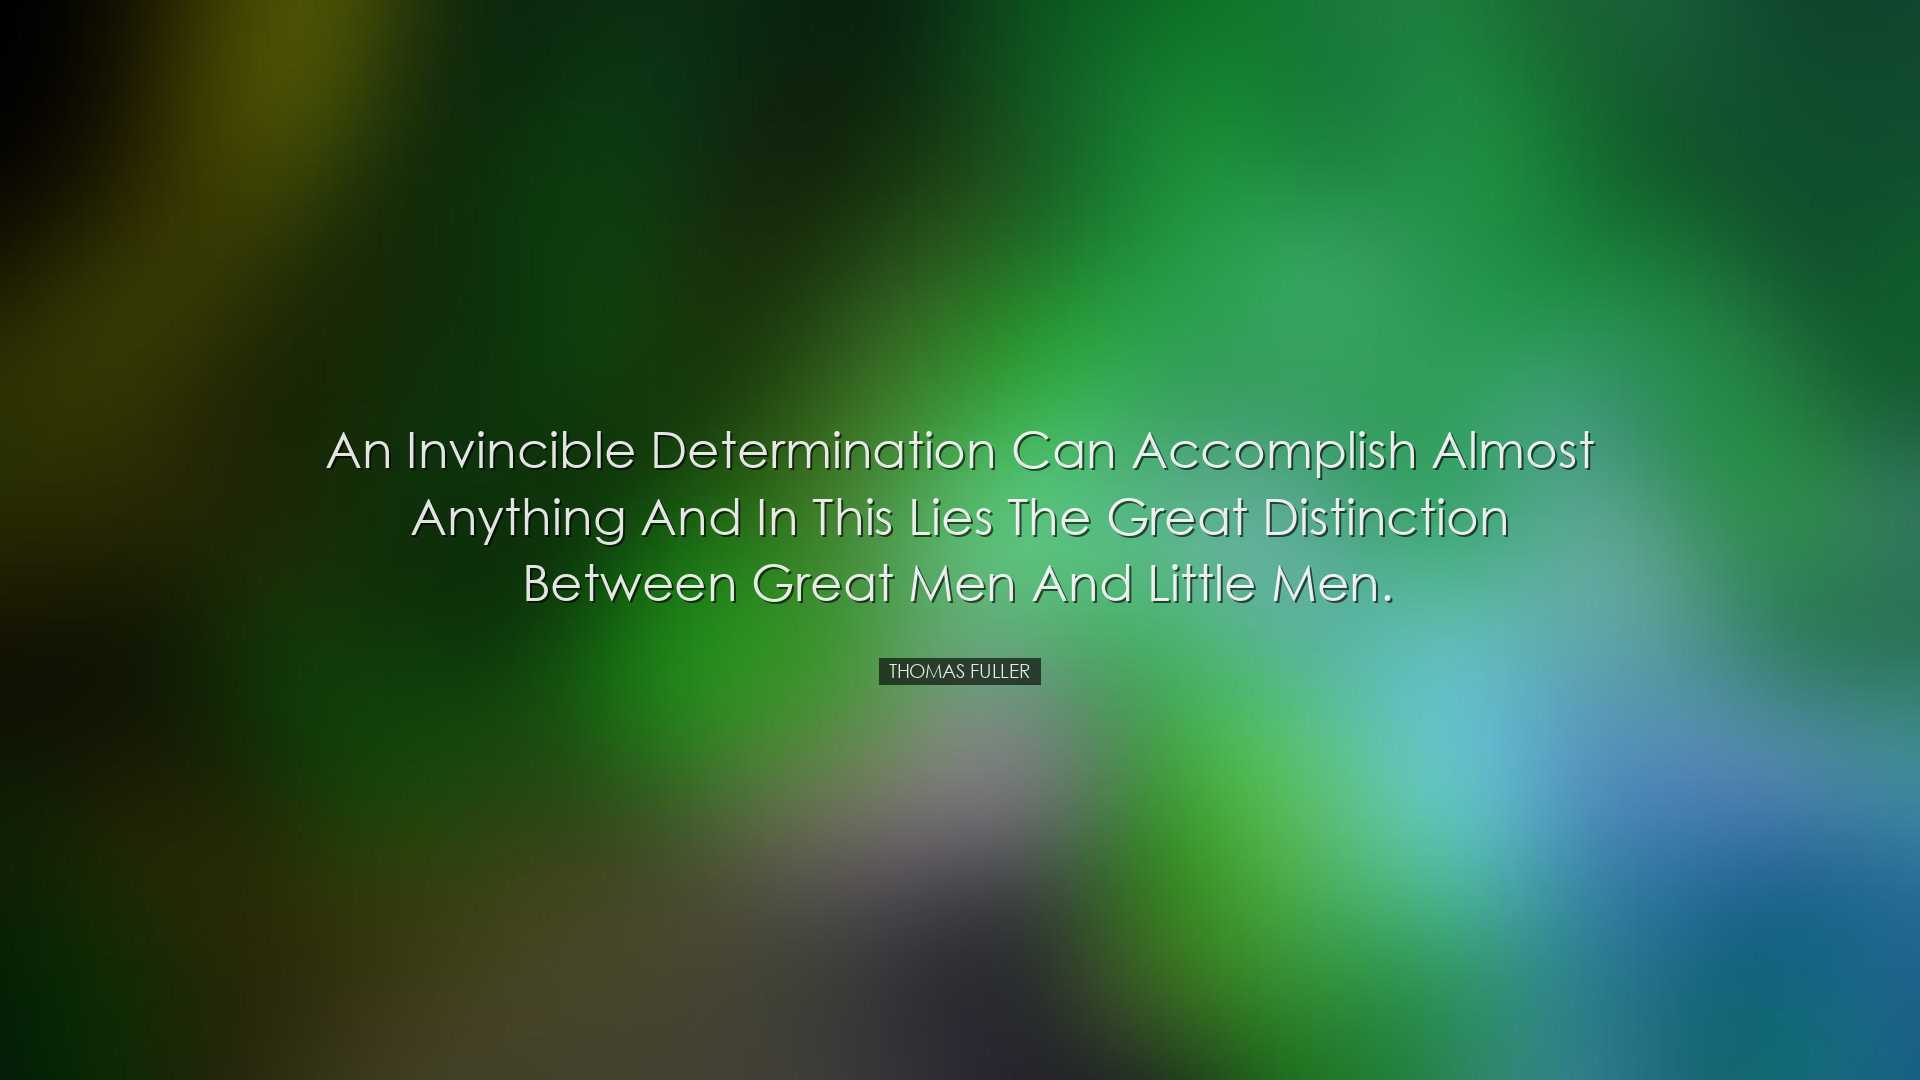 An invincible determination can accomplish almost anything and in